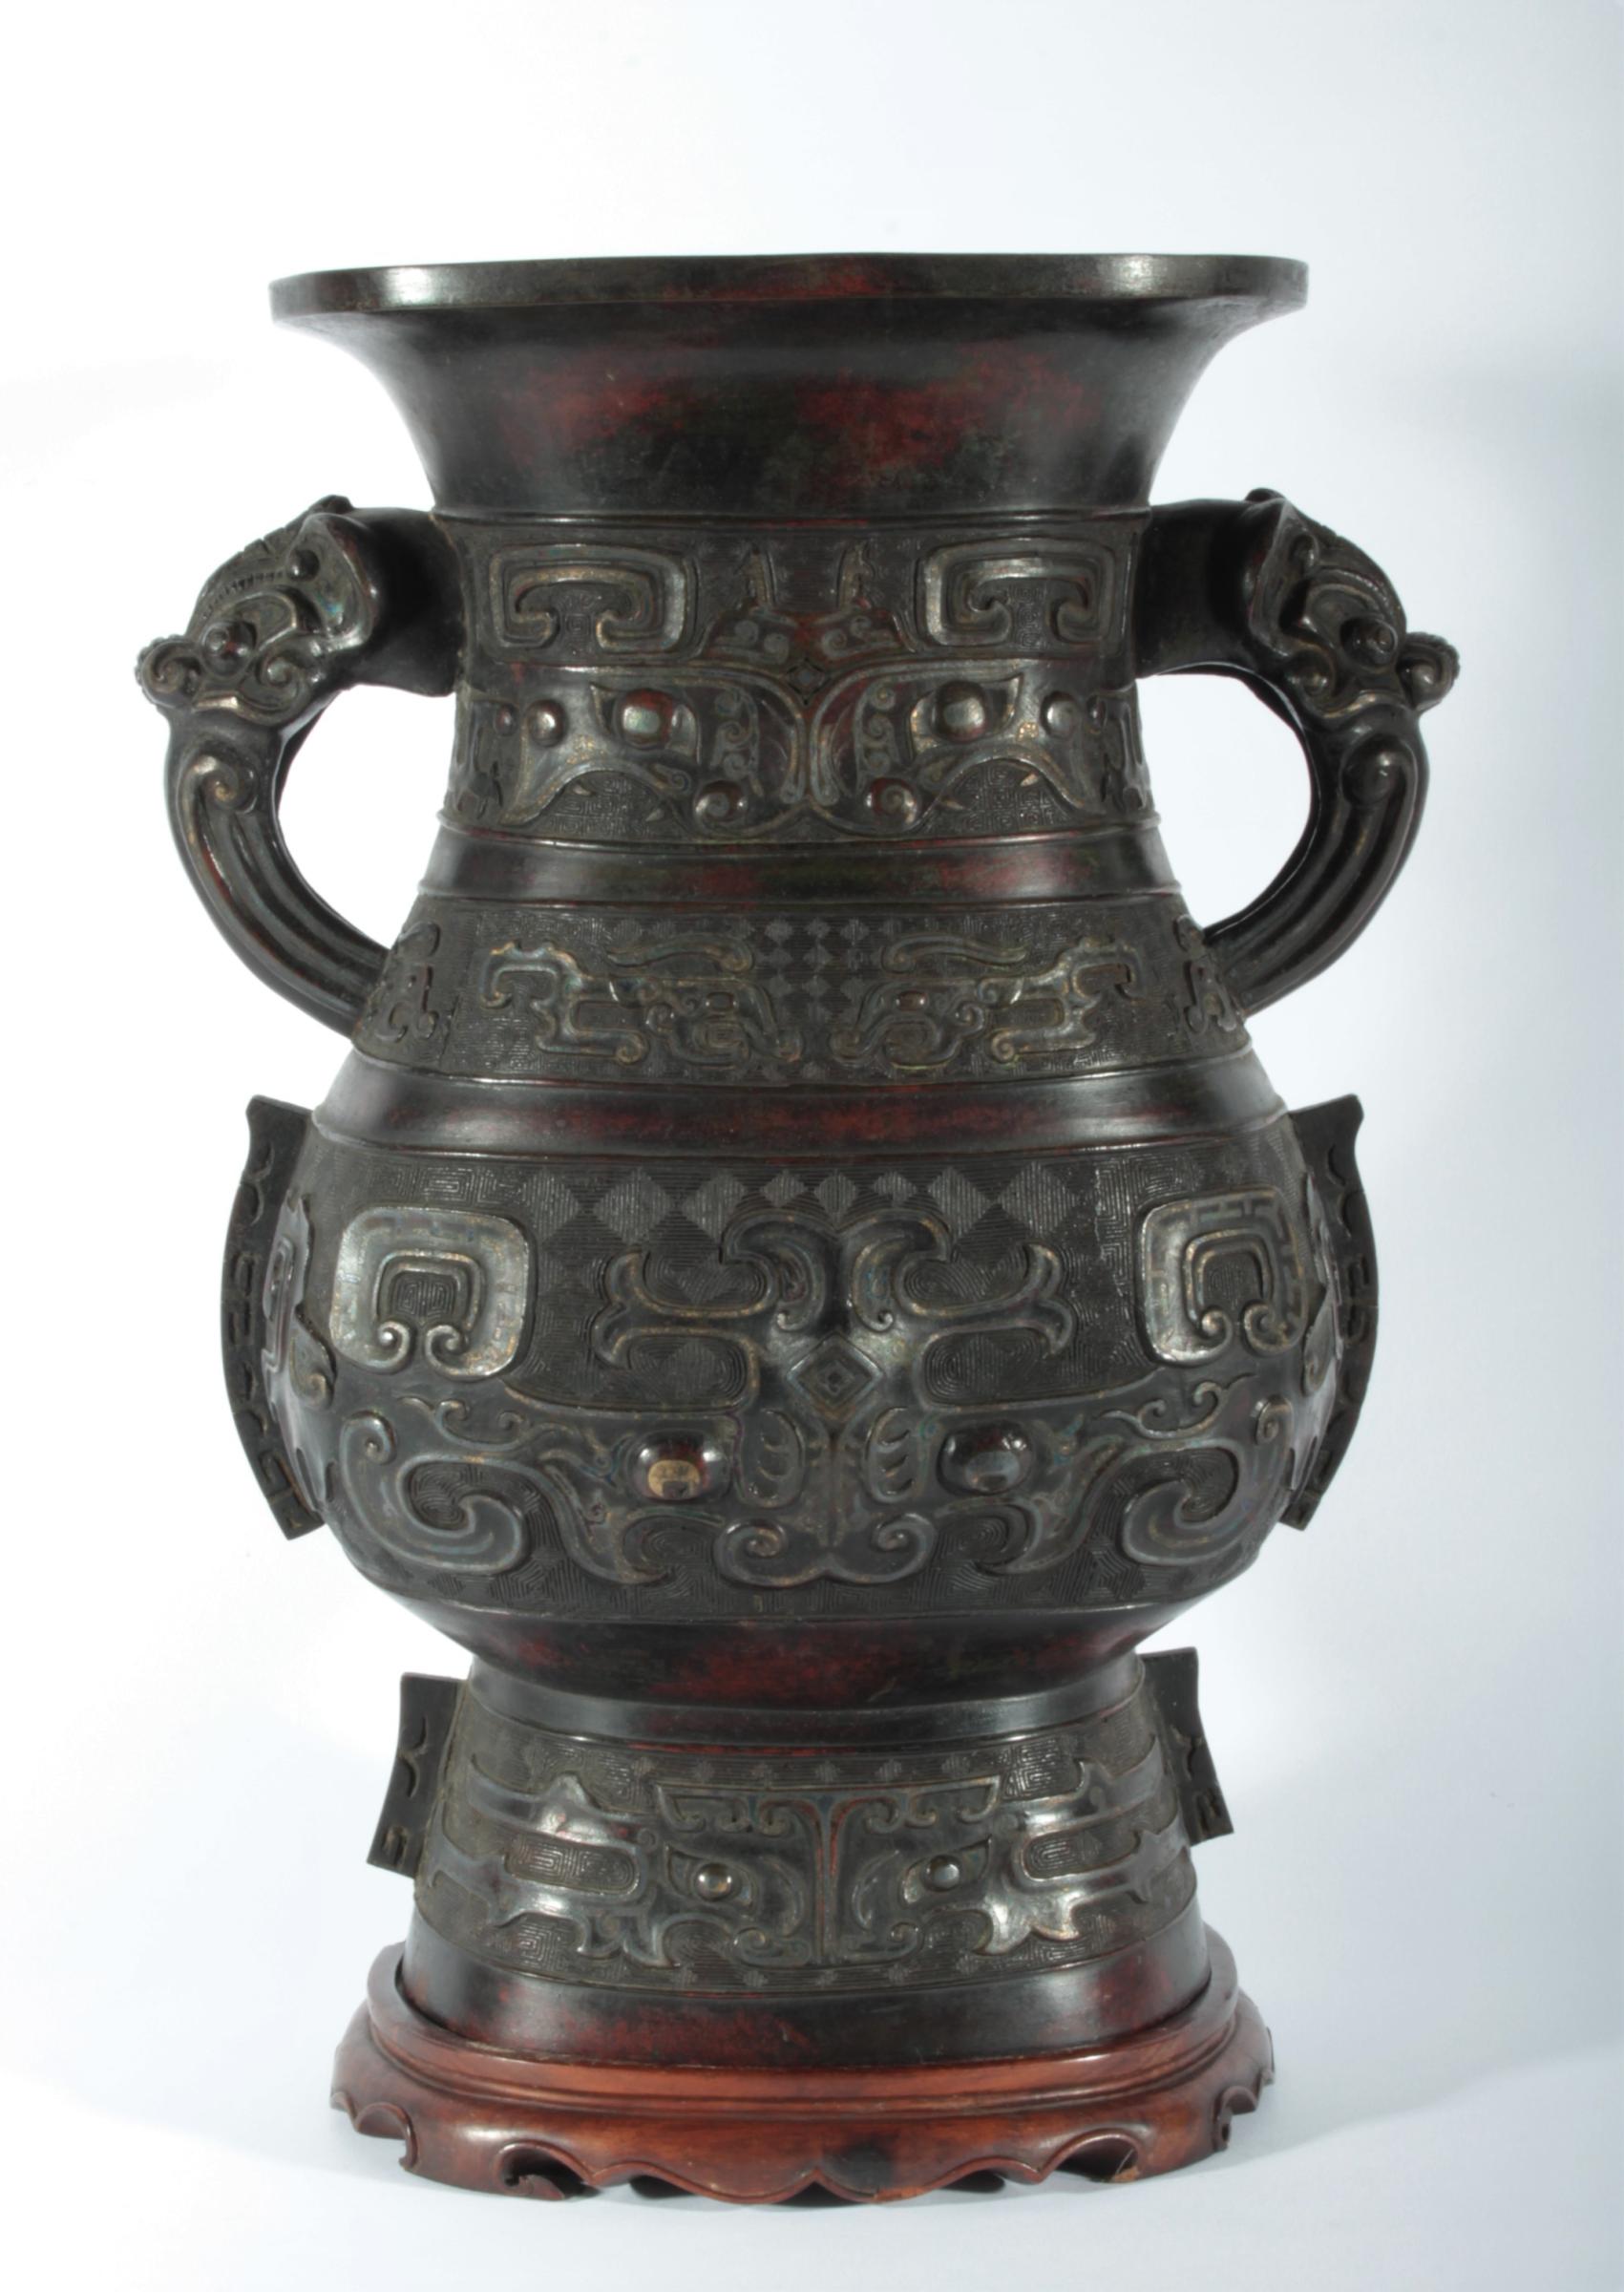 Very rare chinese archaistic gold and silver-inlaid bronze vase, 17th century, Ming Dynasty 